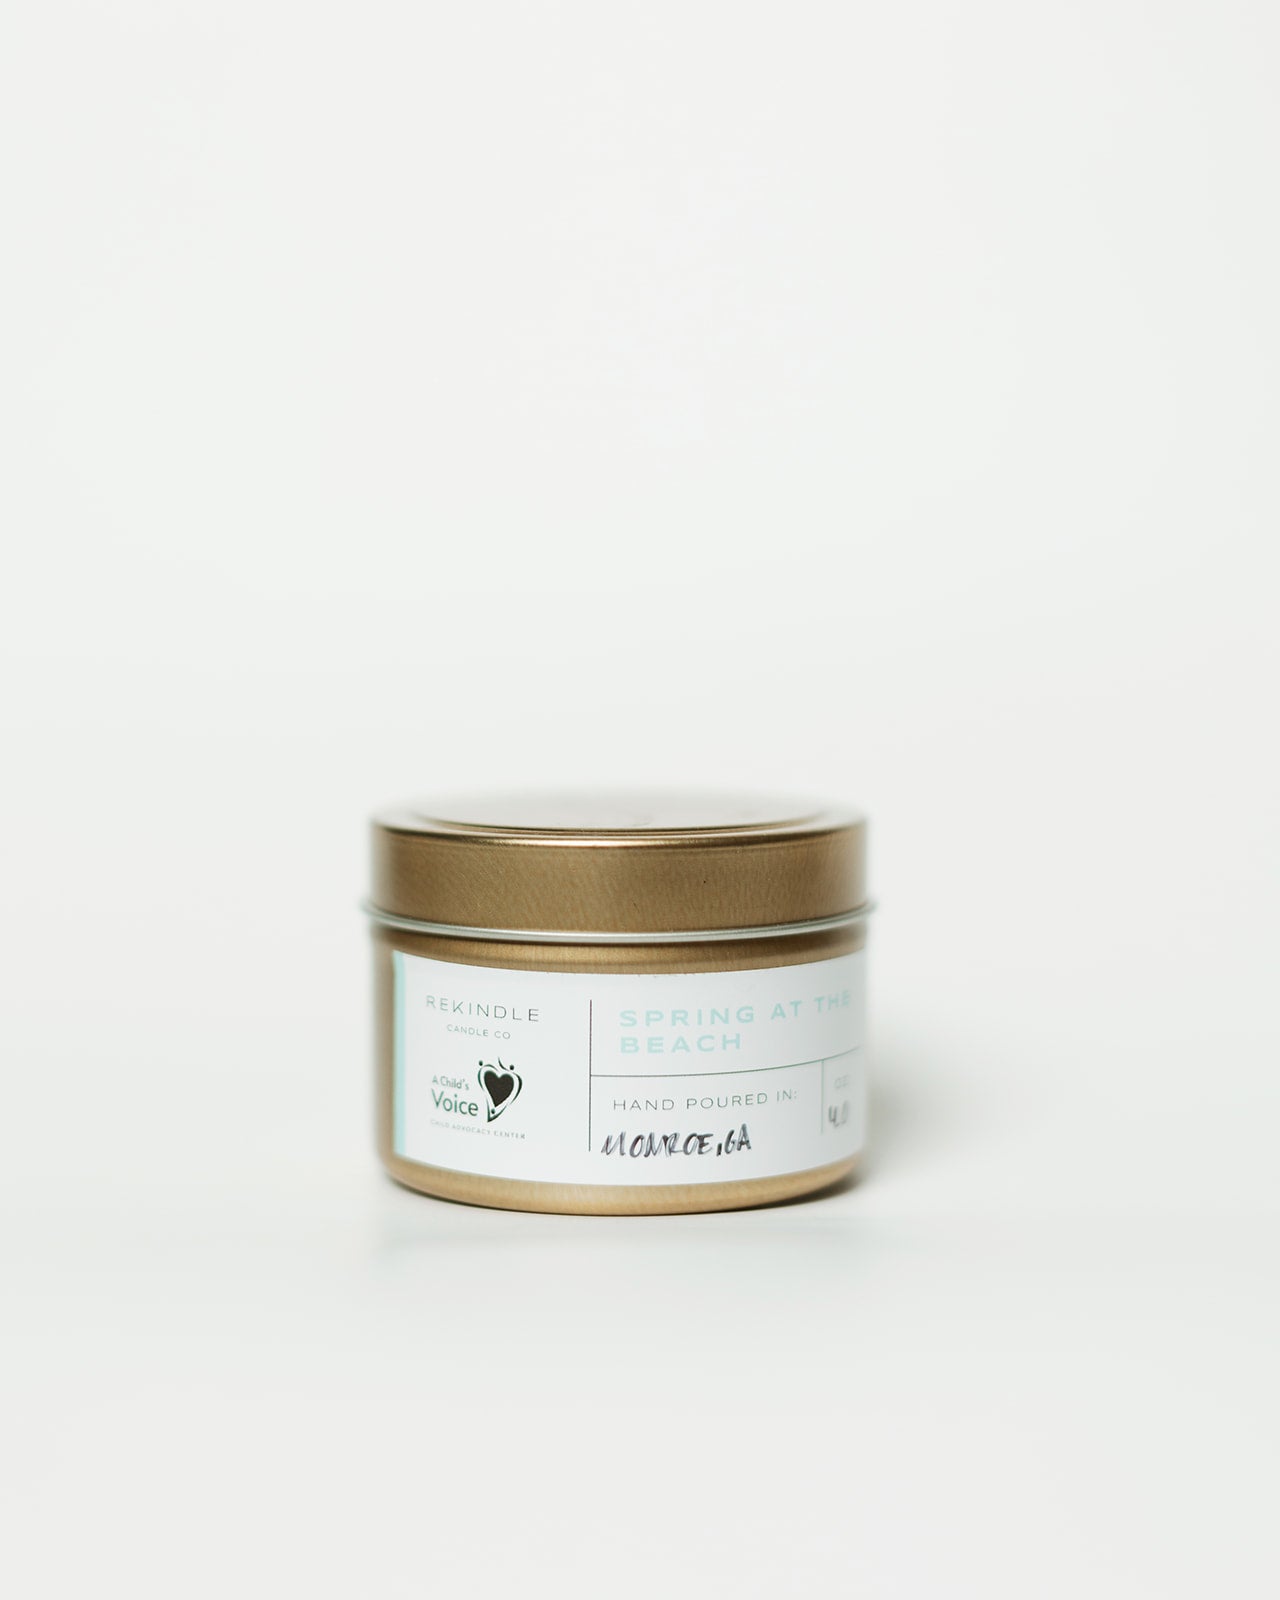 A Child's Voice - Spring at the Beach Soy Candle